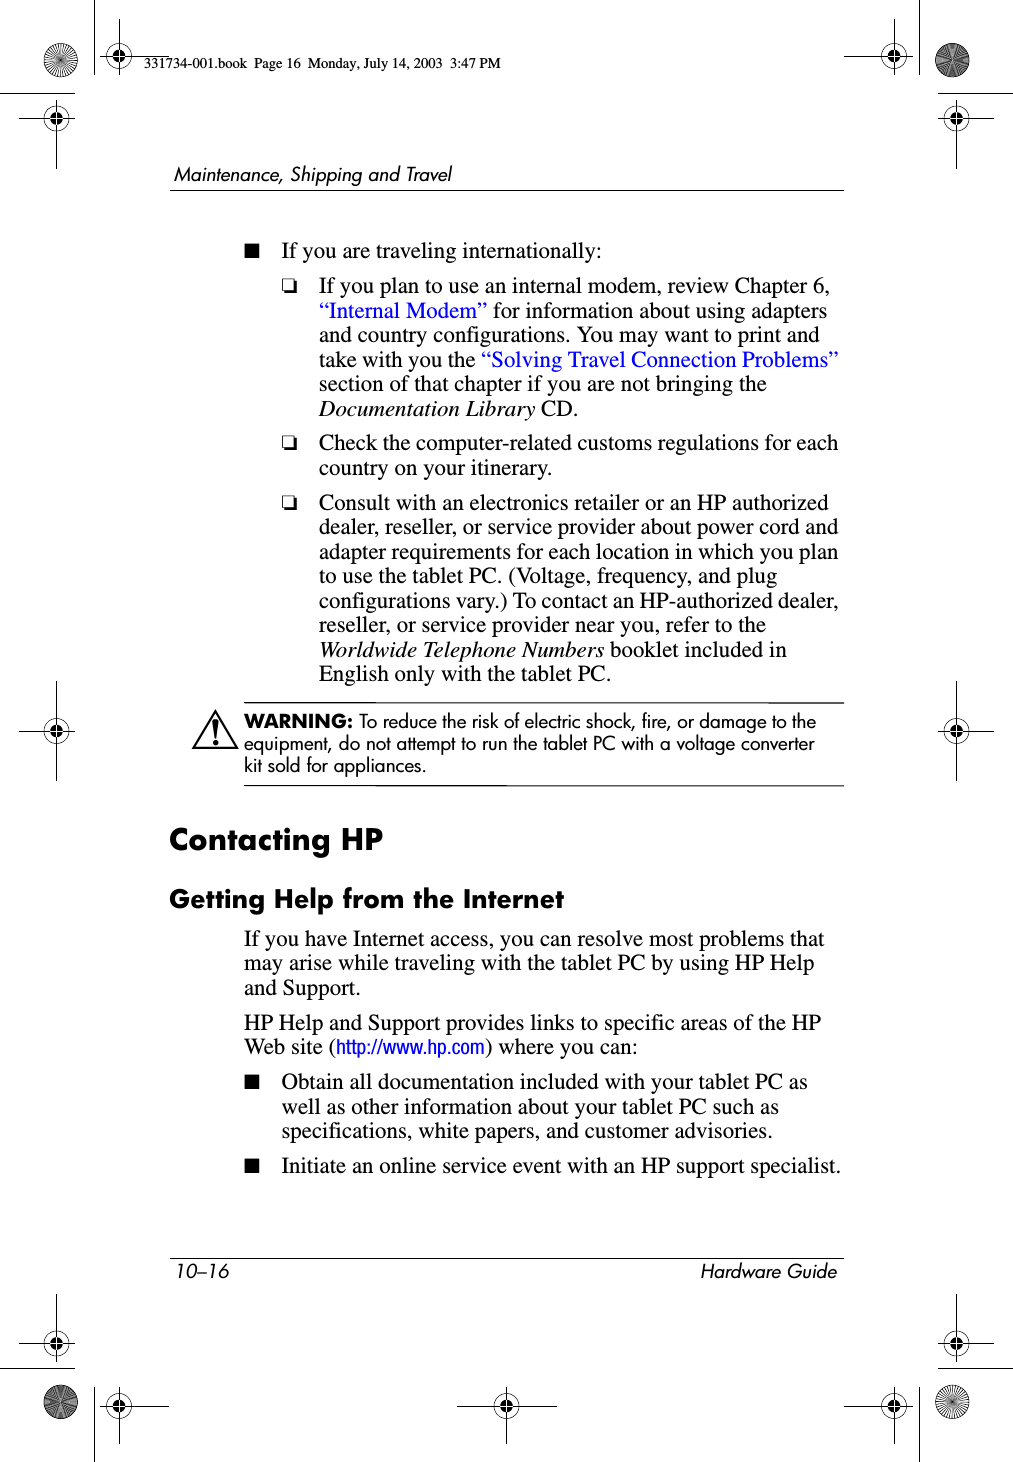 10–16 Hardware GuideMaintenance, Shipping and Travel■If you are traveling internationally:❏If you plan to use an internal modem, review Chapter 6, “Internal Modem” for information about using adapters and country configurations. You may want to print and take with you the “Solving Travel Connection Problems” section of that chapter if you are not bringing the Documentation Library CD. ❏Check the computer-related customs regulations for each country on your itinerary.❏Consult with an electronics retailer or an HP authorized dealer, reseller, or service provider about power cord and adapter requirements for each location in which you plan to use the tablet PC. (Voltage, frequency, and plug configurations vary.) To contact an HP-authorized dealer, reseller, or service provider near you, refer to the Worldwide Telephone Numbers booklet included in English only with the tablet PC.ÅWARNING: To reduce the risk of electric shock, fire, or damage to the equipment, do not attempt to run the tablet PC with a voltage converter kit sold for appliances.Contacting HPGetting Help from the InternetIf you have Internet access, you can resolve most problems that may arise while traveling with the tablet PC by using HP Help and Support.HP Help and Support provides links to specific areas of the HP Web site (http://www.hp.com) where you can:■Obtain all documentation included with your tablet PC as well as other information about your tablet PC such as specifications, white papers, and customer advisories.■Initiate an online service event with an HP support specialist.331734-001.book  Page 16  Monday, July 14, 2003  3:47 PM